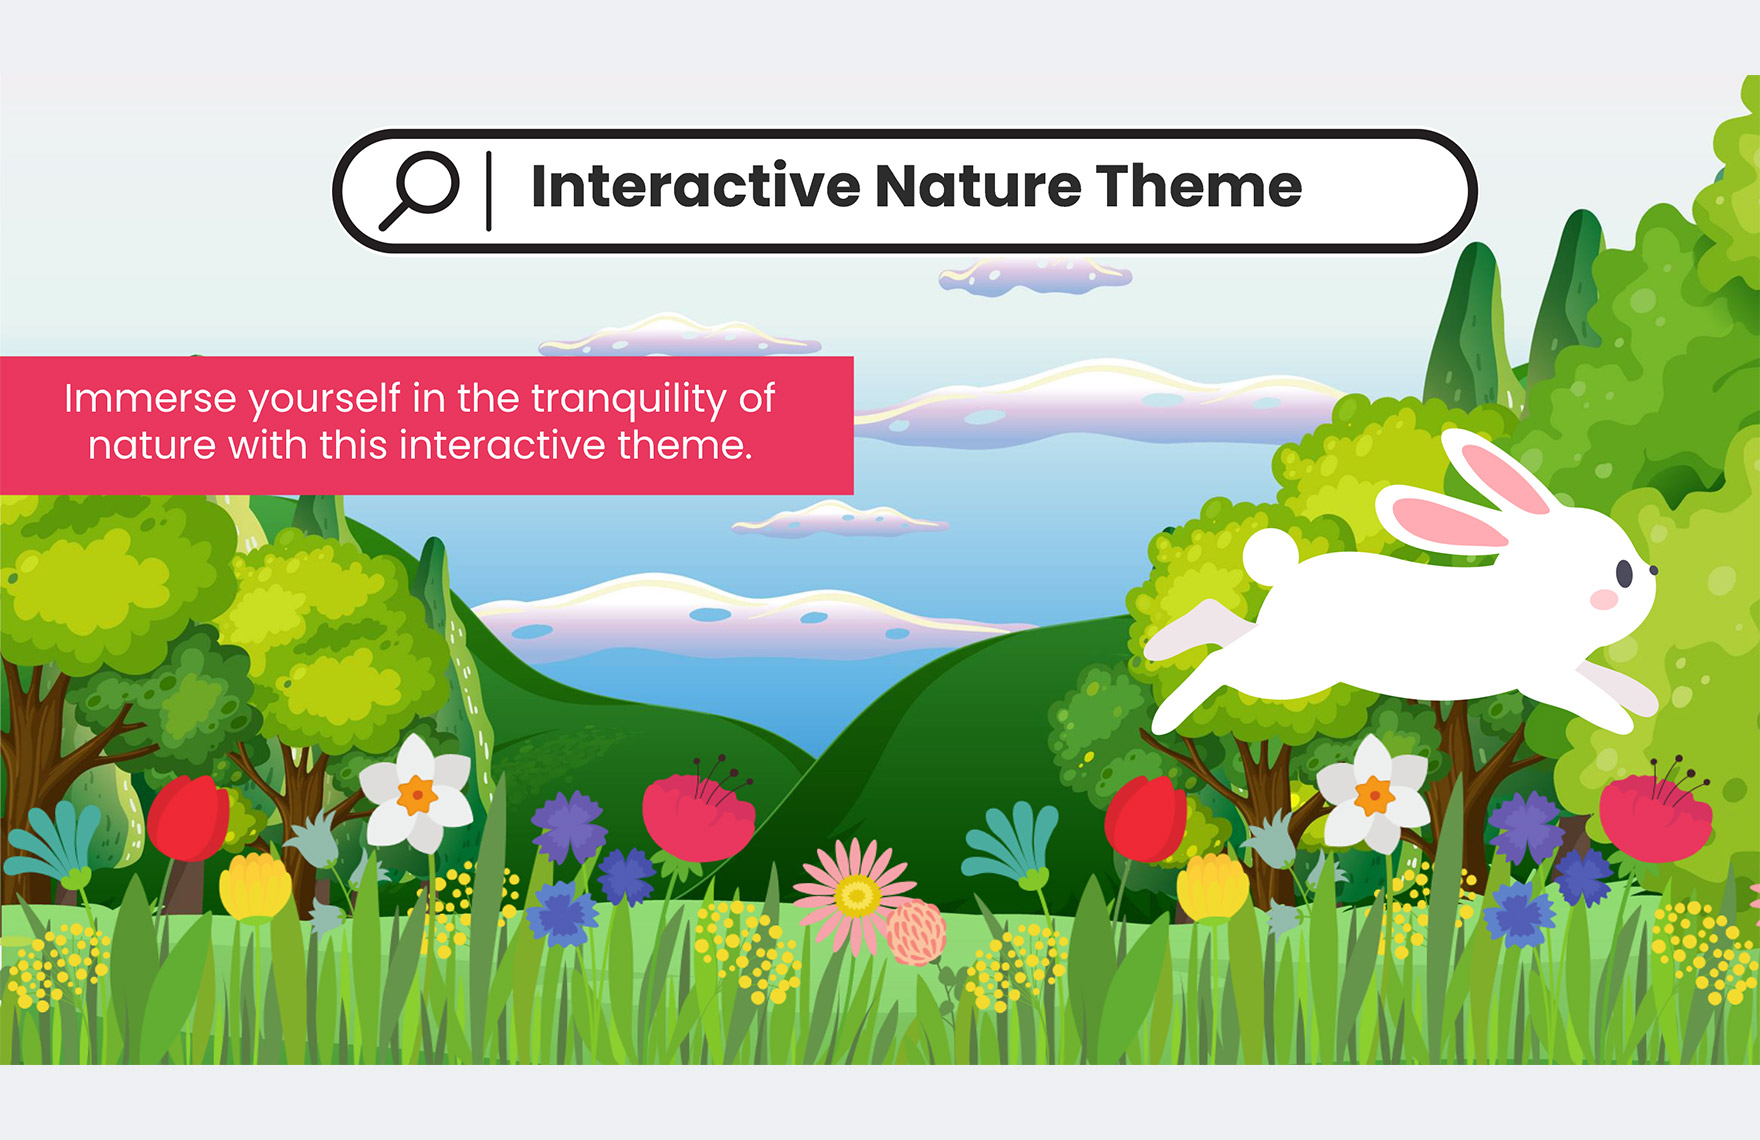 Interactive Chrome Themes Template